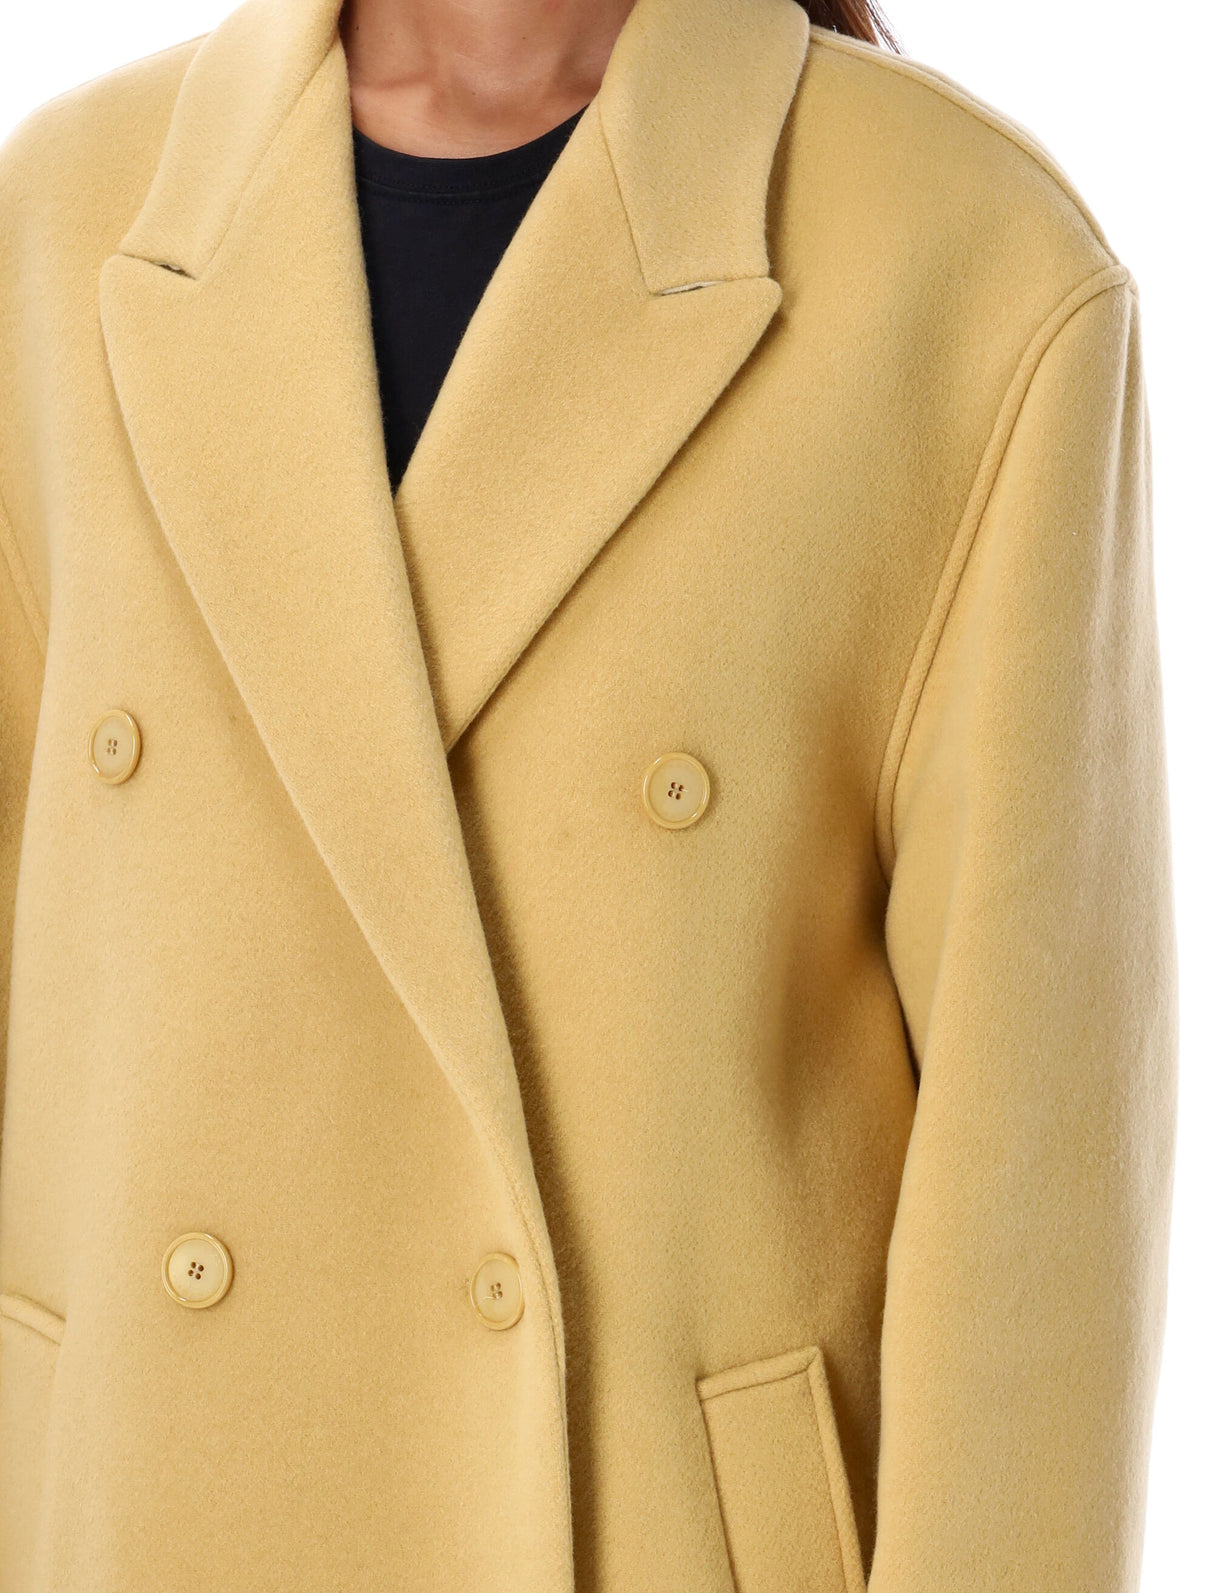 Theodore Wool Blend Jacket - Knee-Length V-Neck Outerwear for Women in Straw Yellow